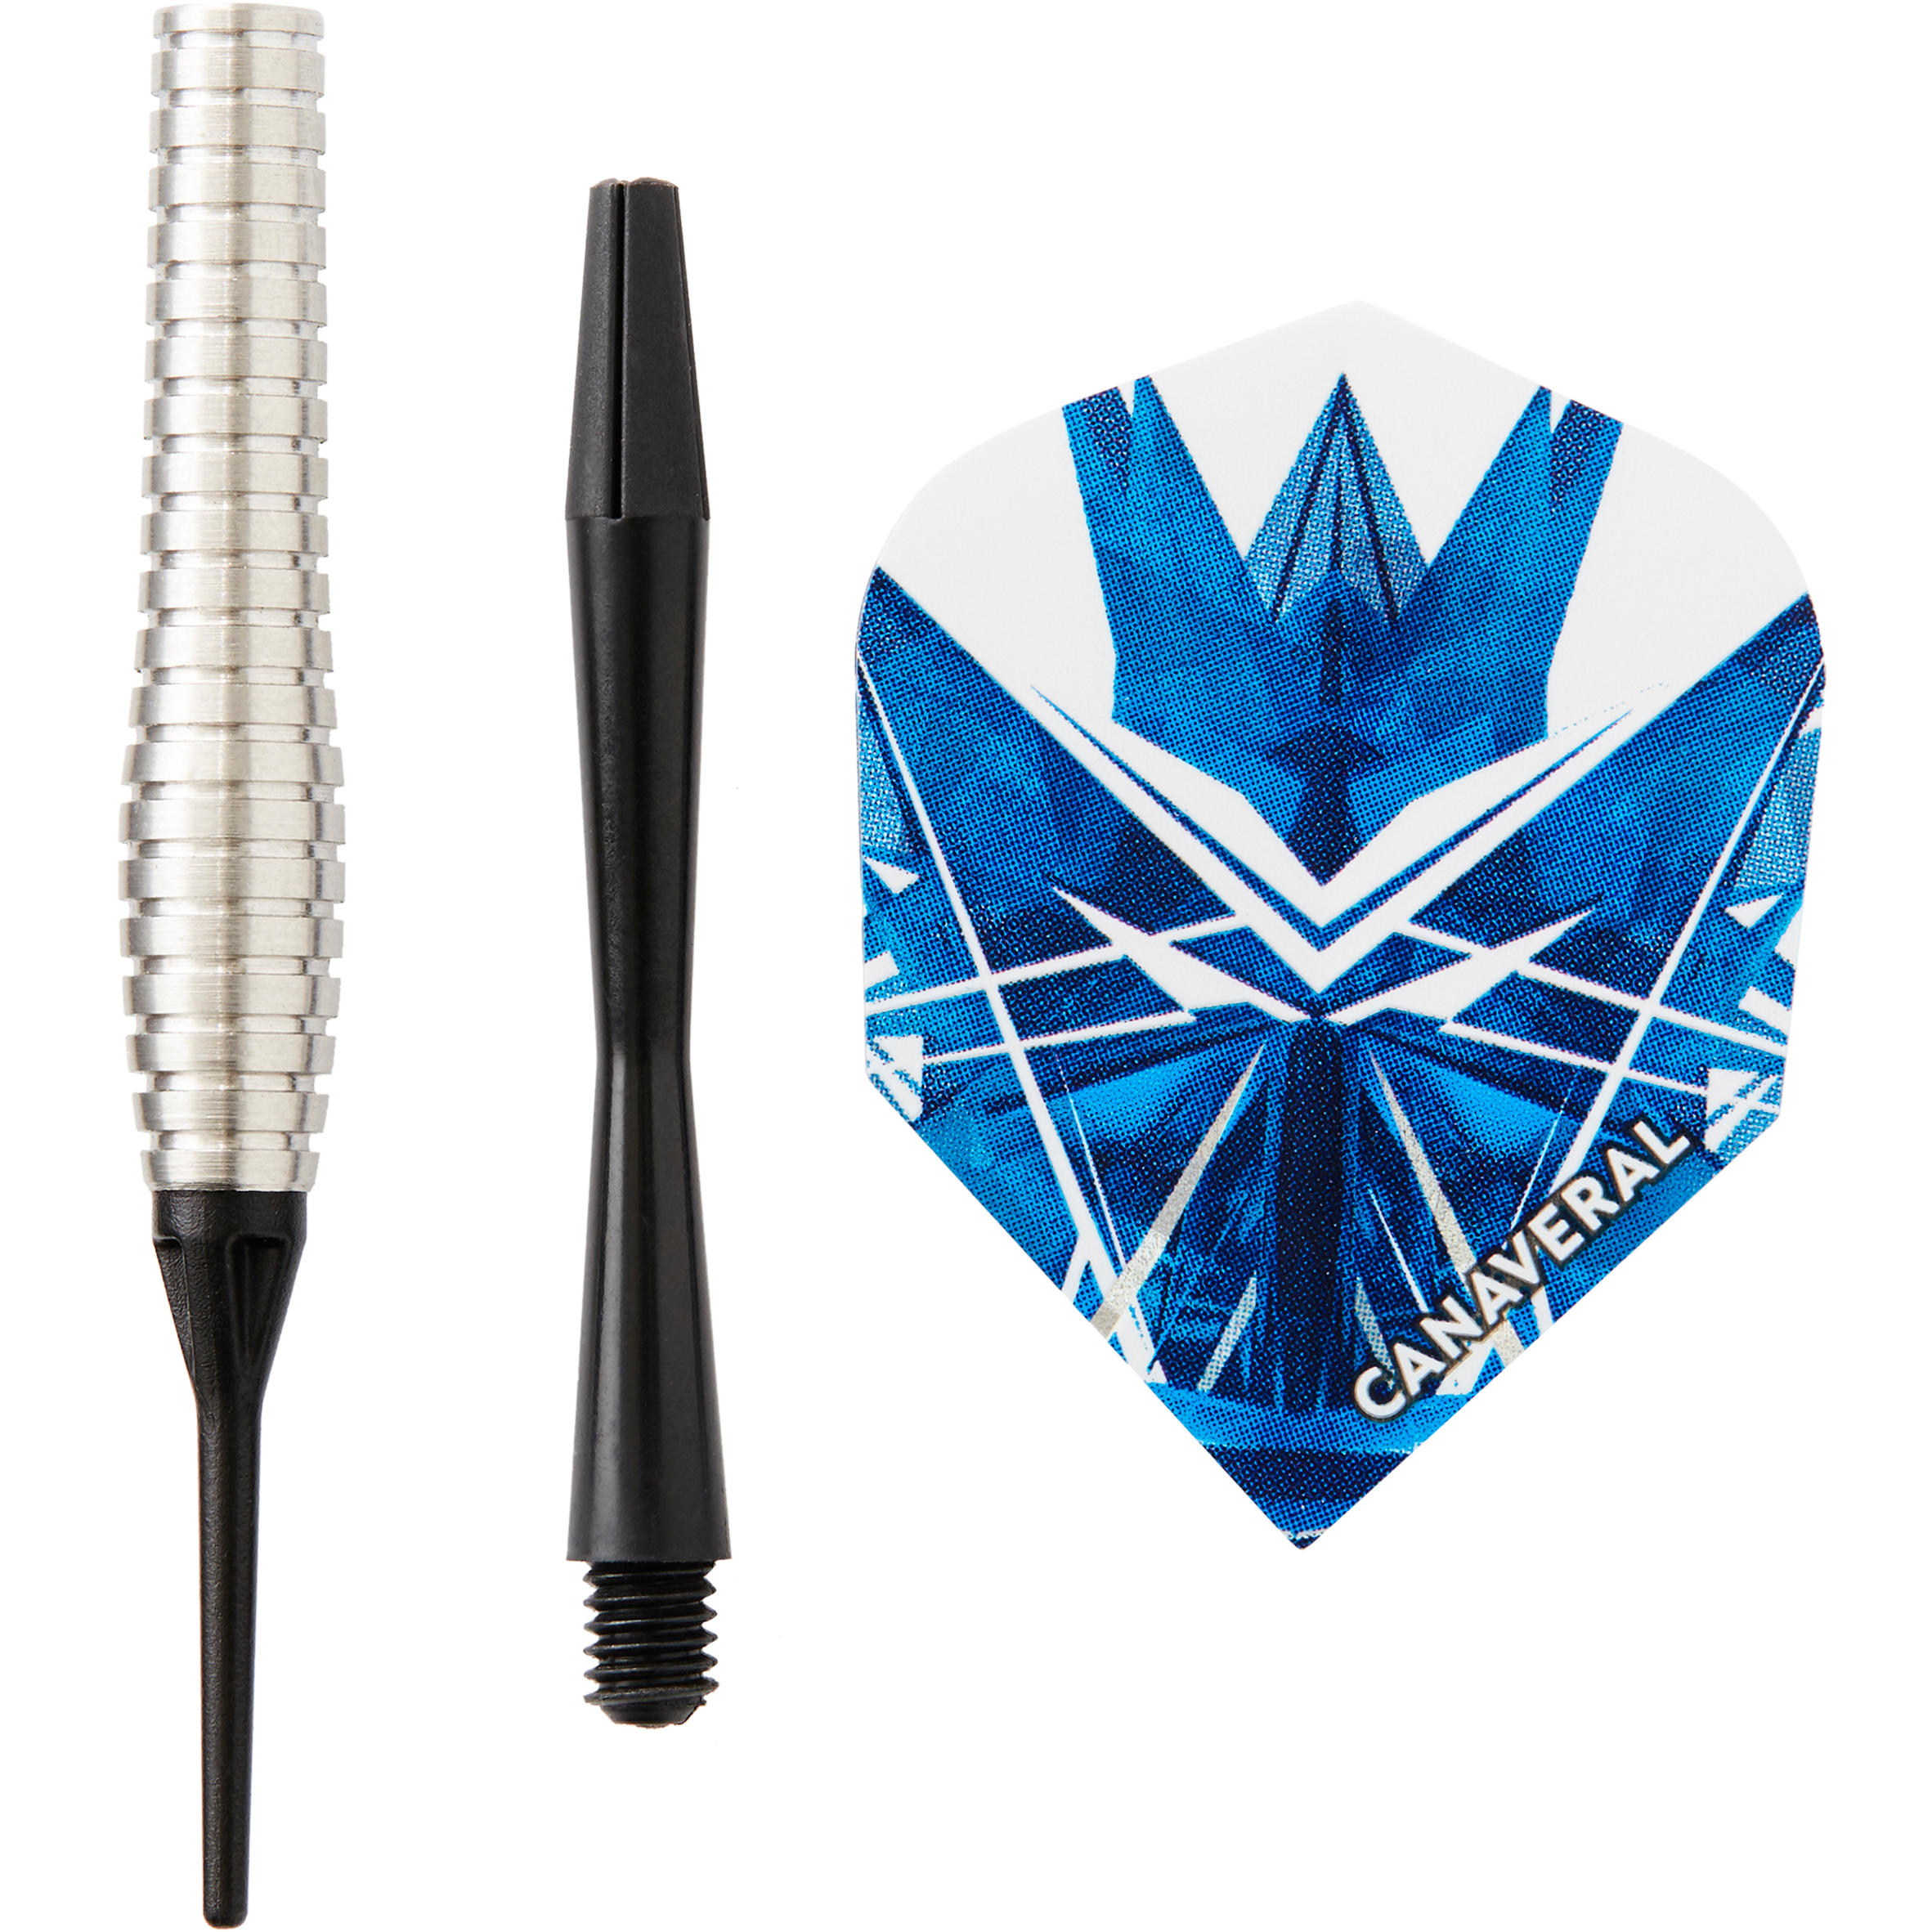 S900 Soft Tip Darts Tri-Pack - CANAVERAL